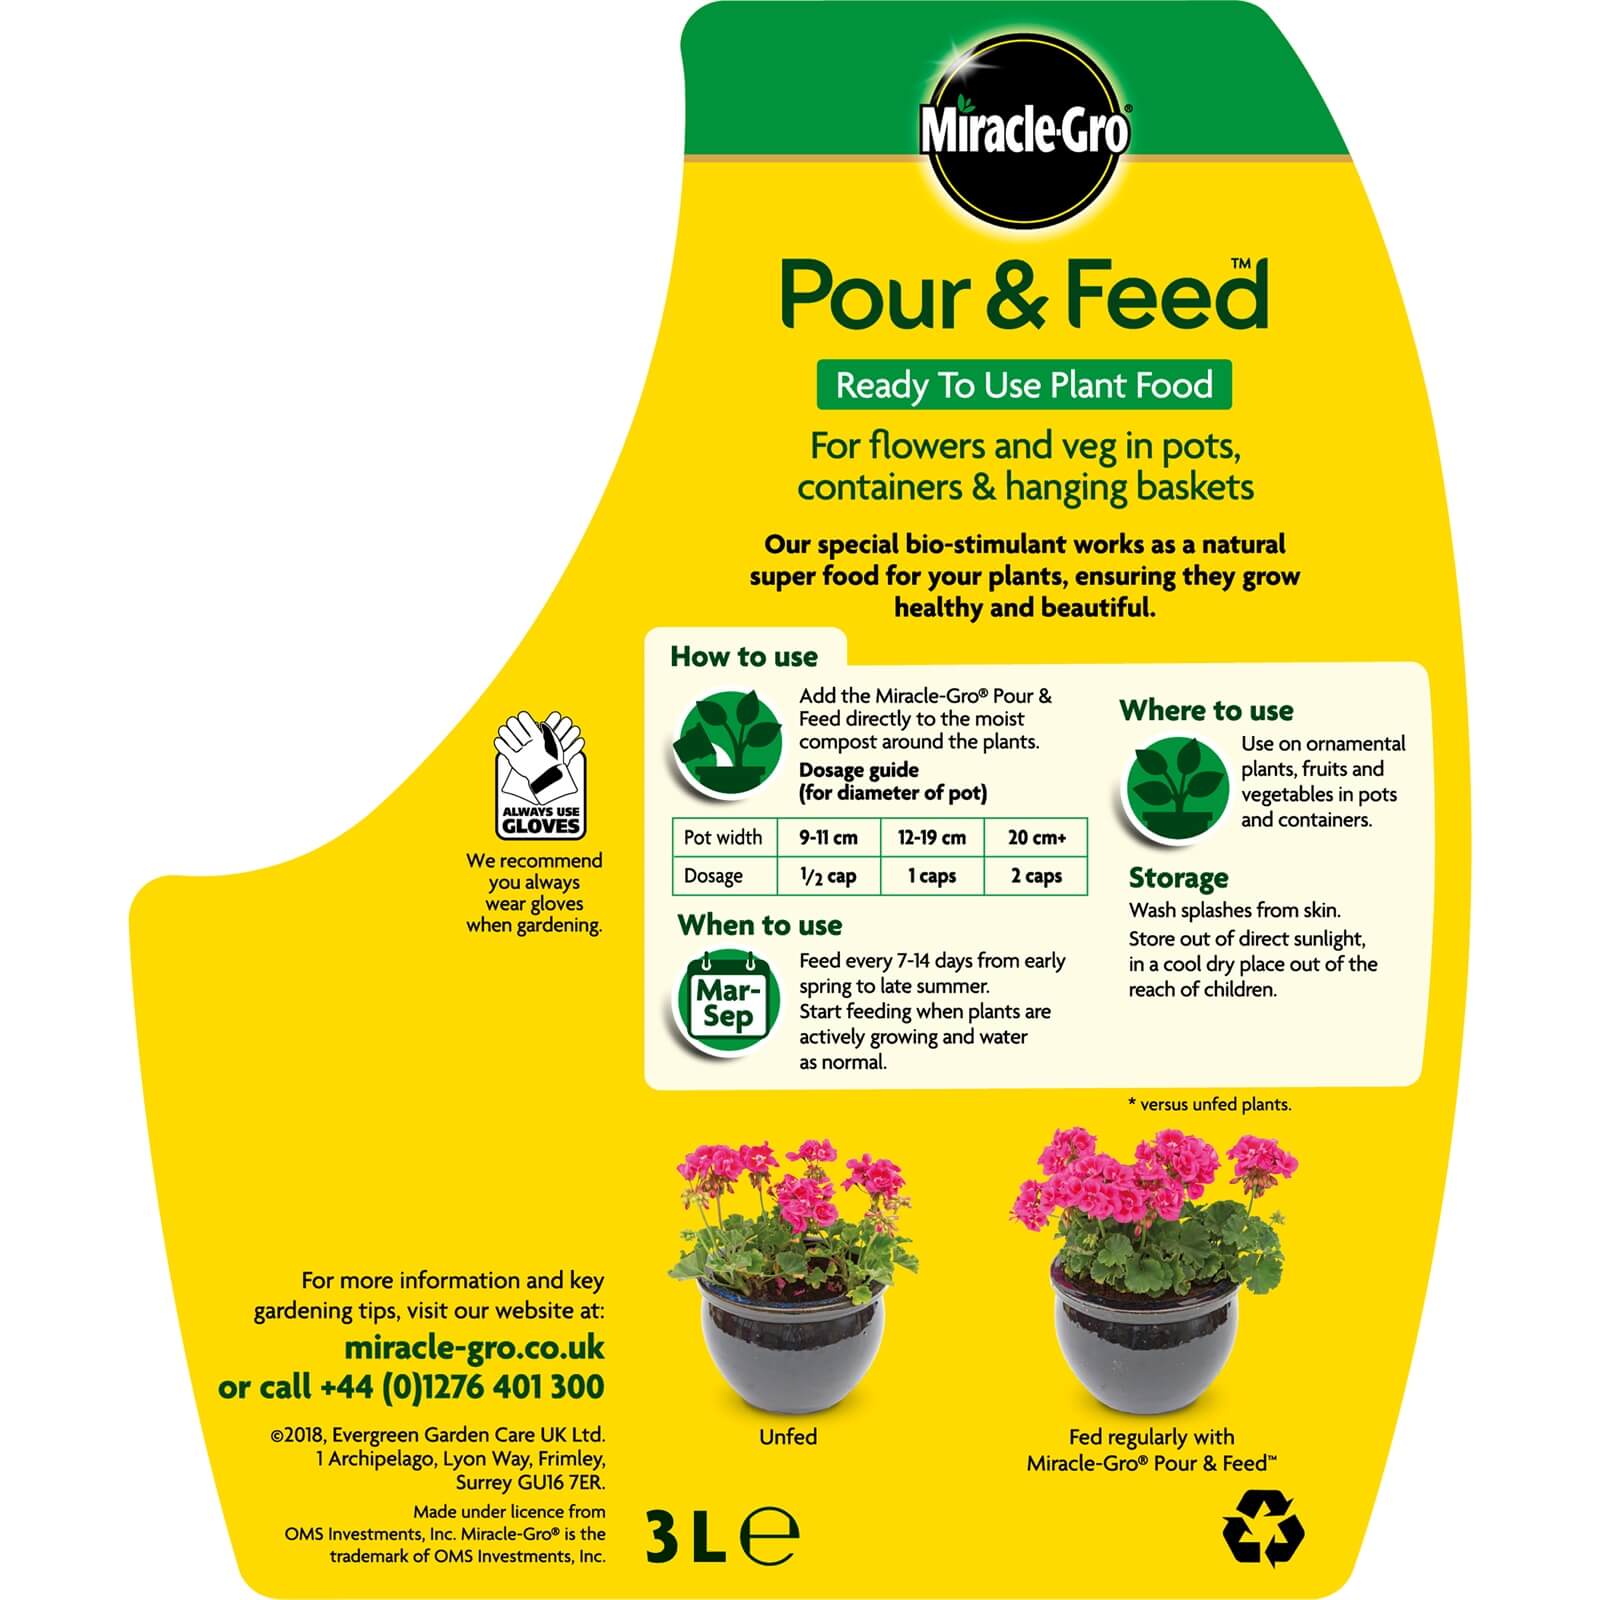 Miracle-Gro Pour & Feed Ready To Use Plant Food - 3L